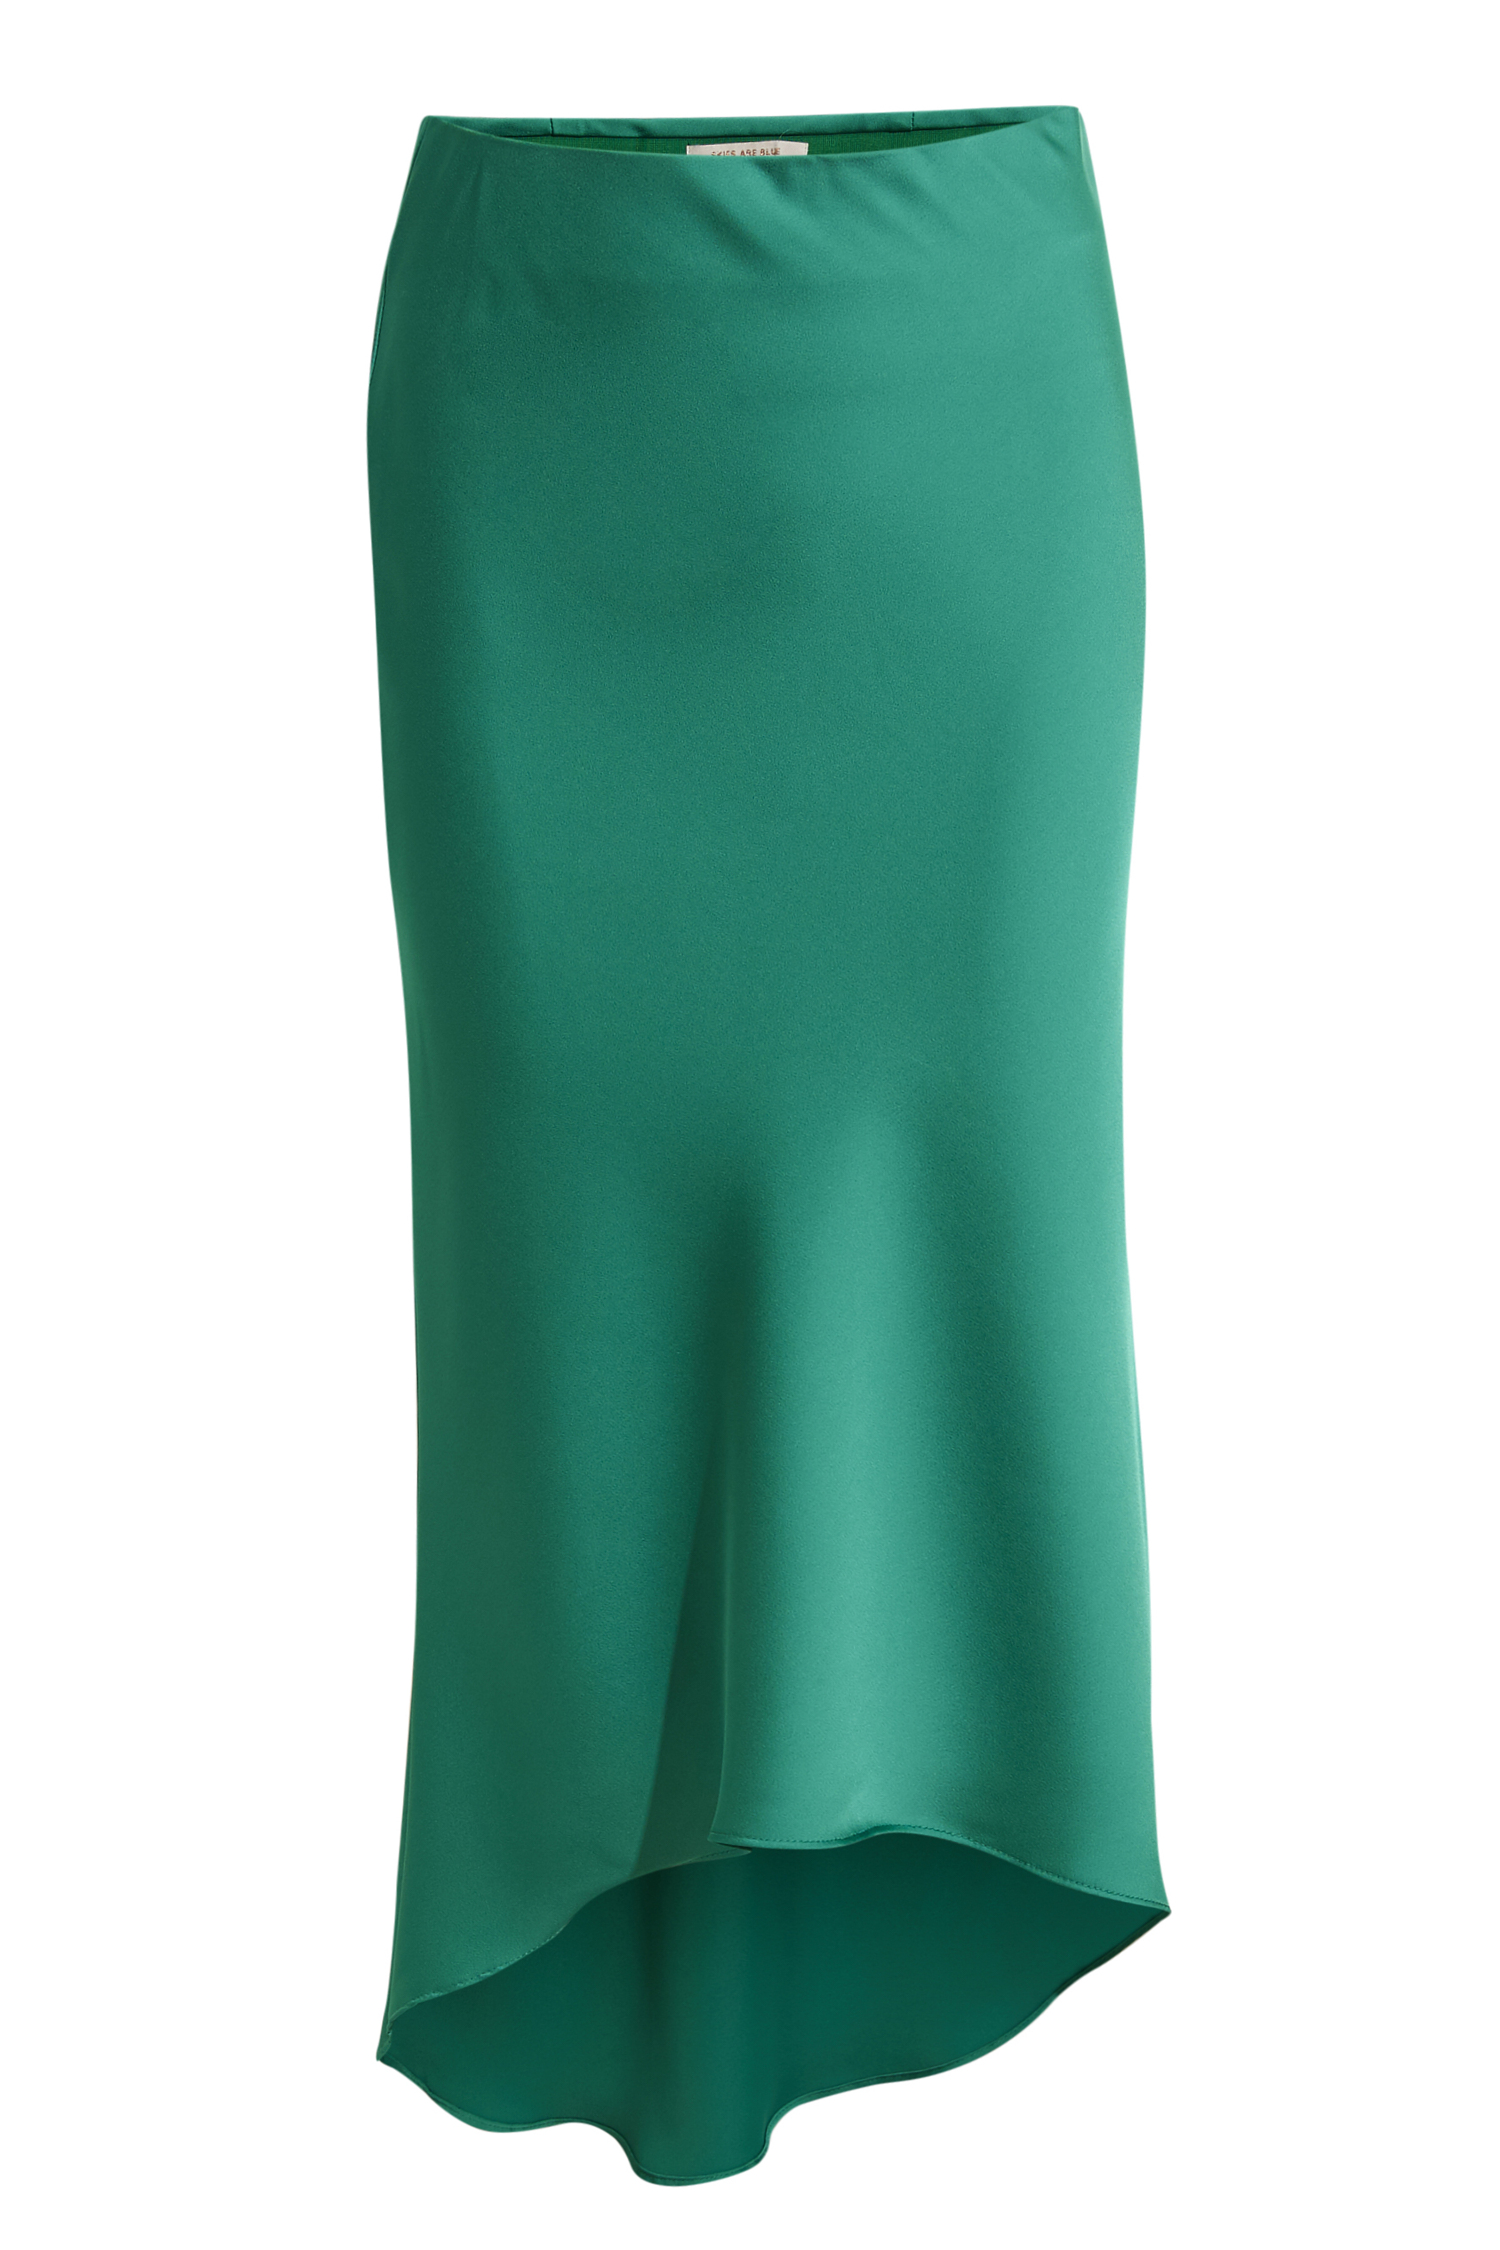 Skies are Blue Midi Satin High Low Skirt in Green | DAILYLOOK